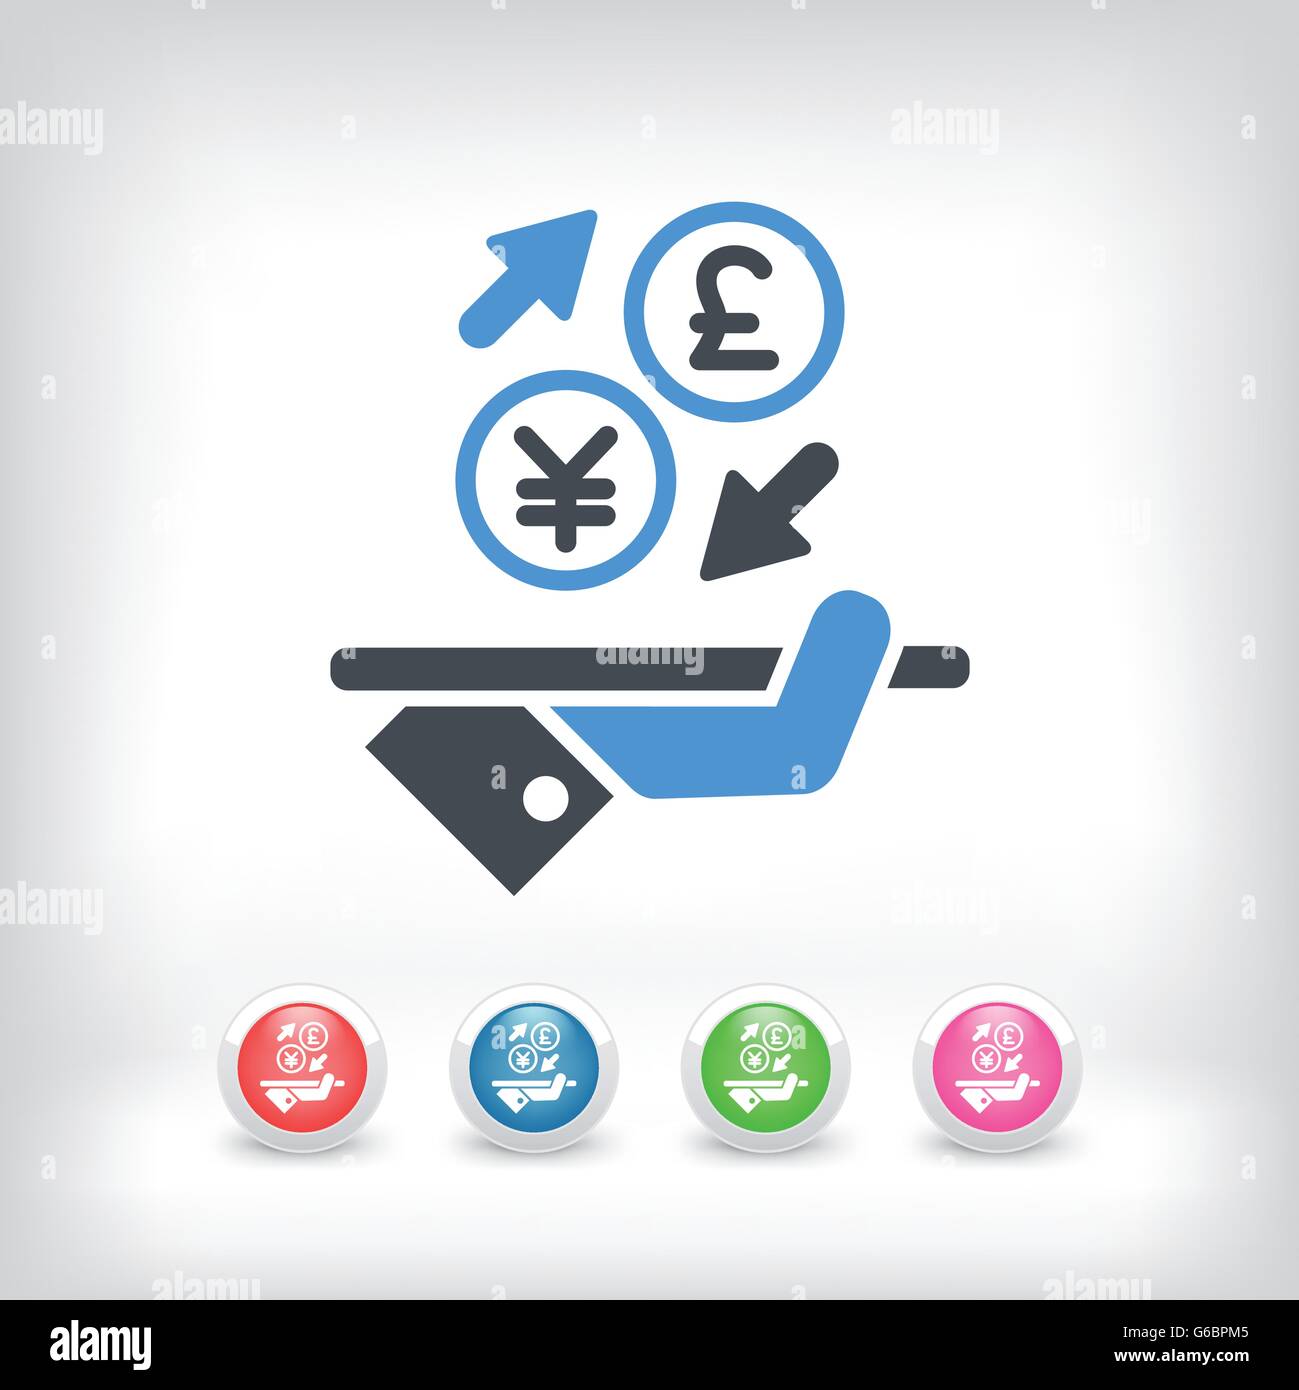 Yuan/Sterling - Foreign currency exchange icon Stock Vector